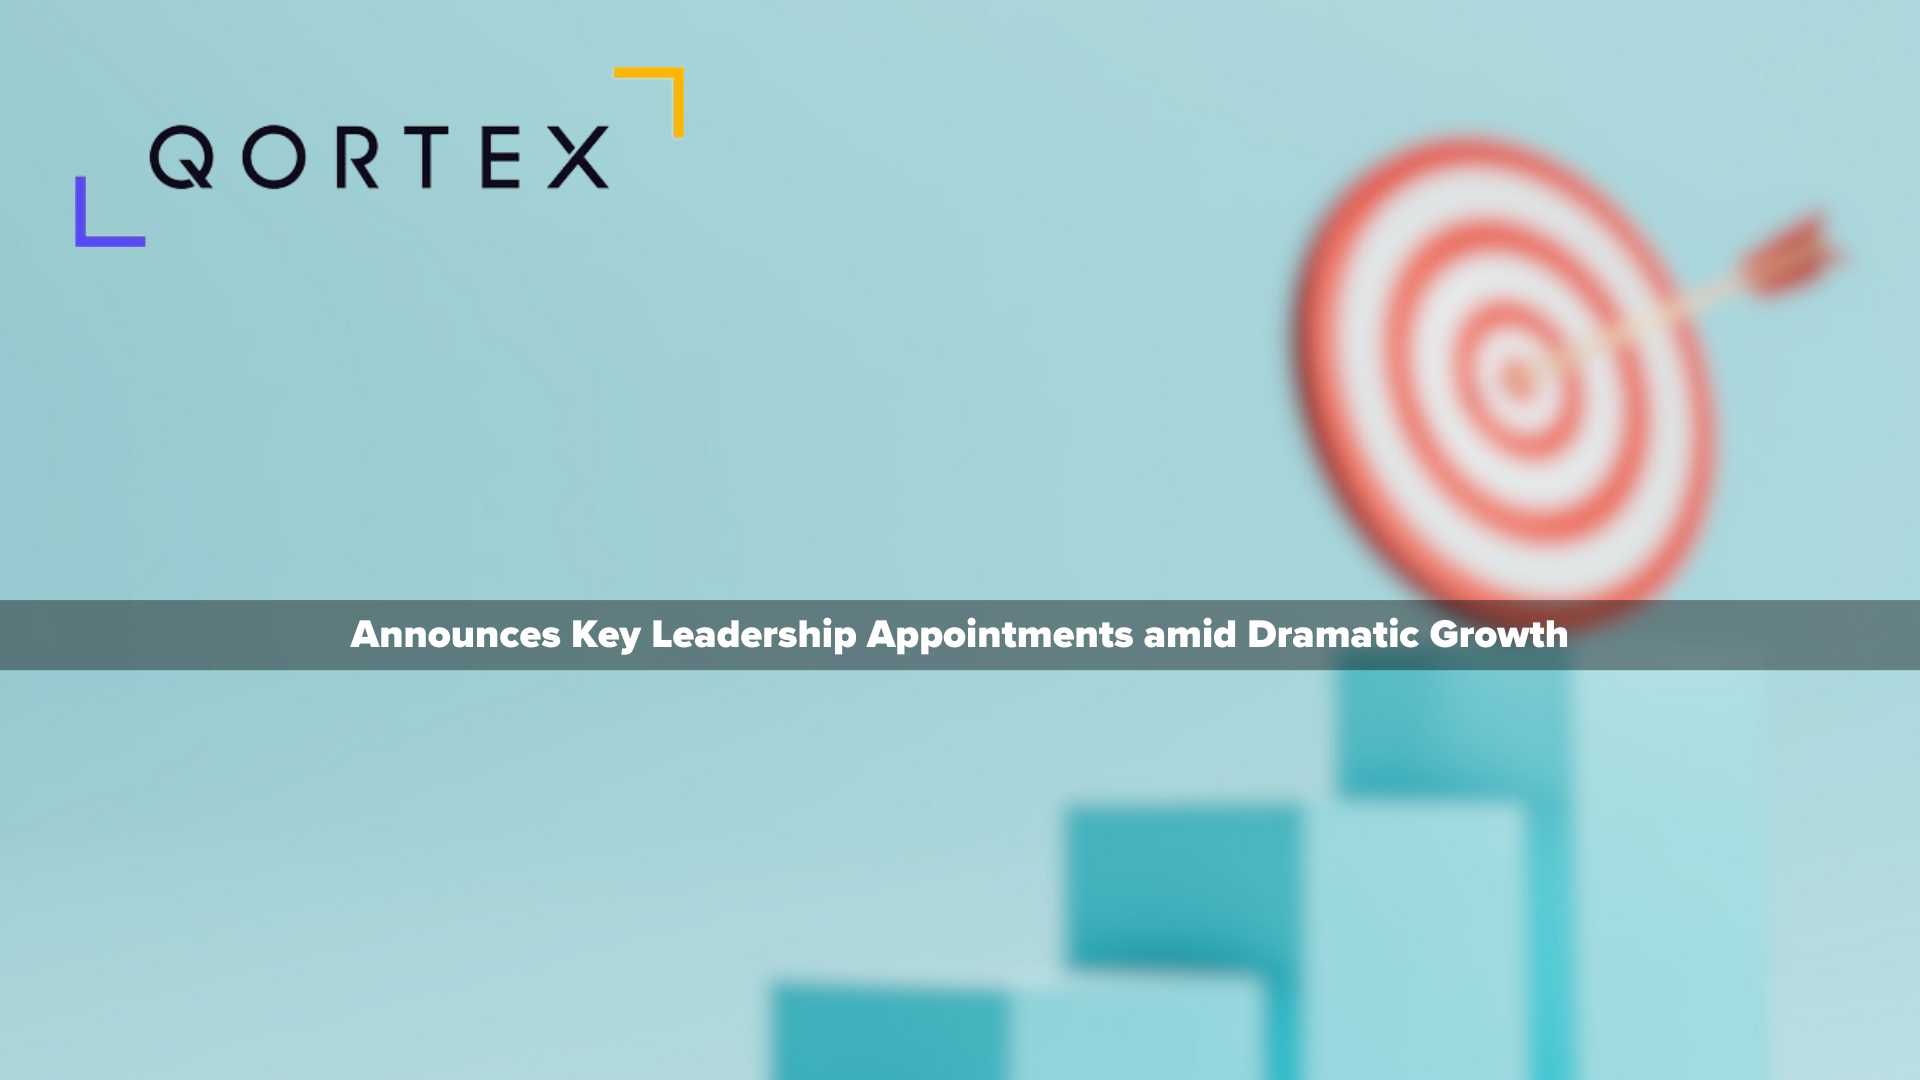 Qortex Announces Key Leadership Appointments amid Dramatic Growth Signaling Increased Demand for Pioneering AI Solutions